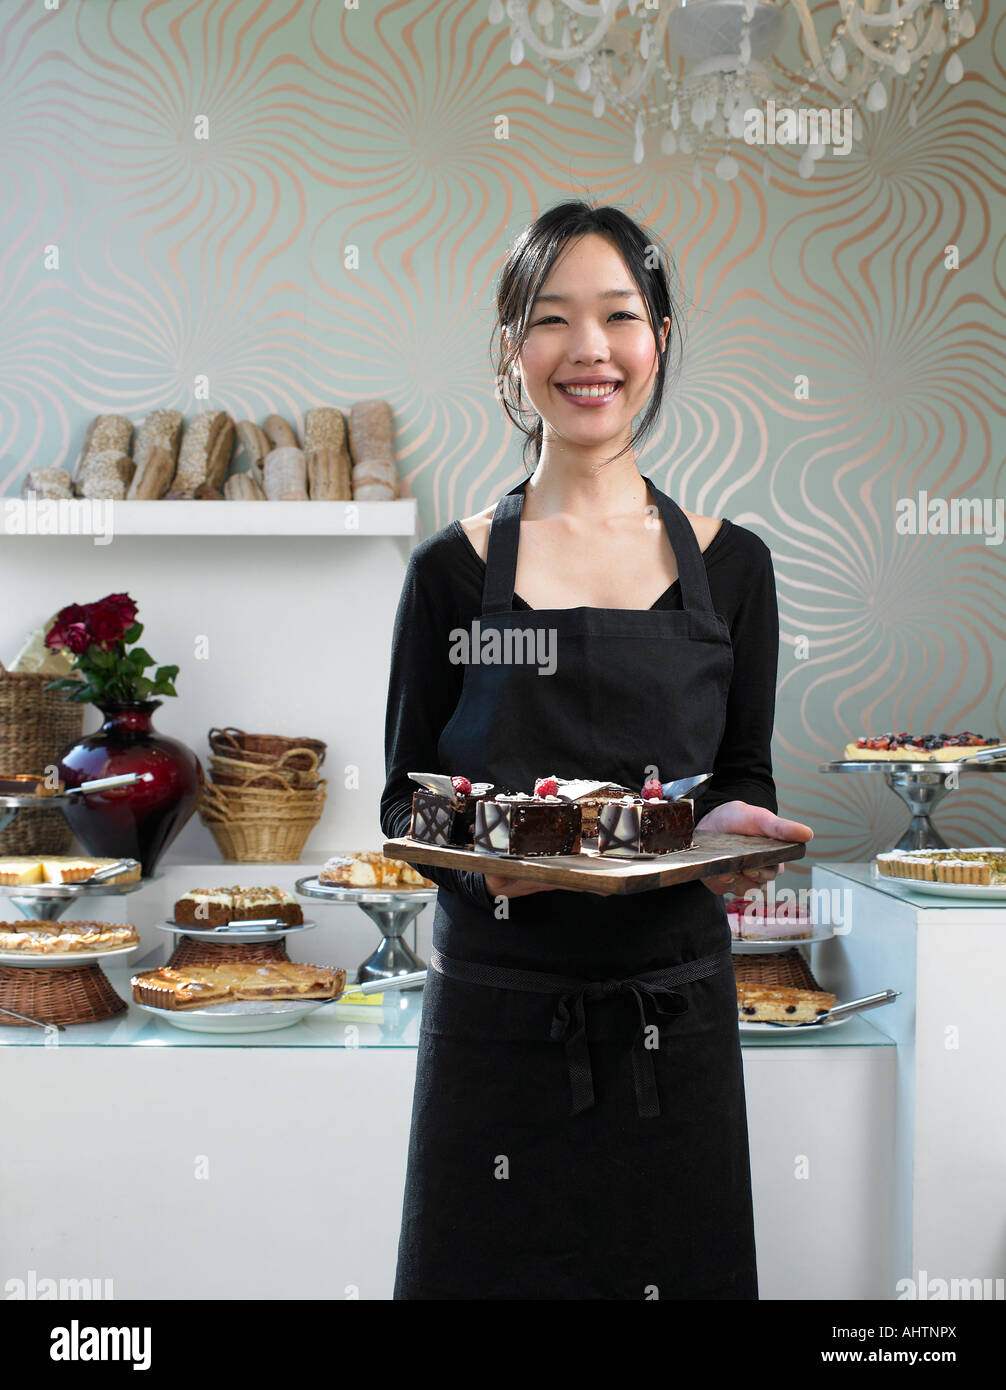 Young waitress holding tray of desserts, smiling, portrait Banque D'Images